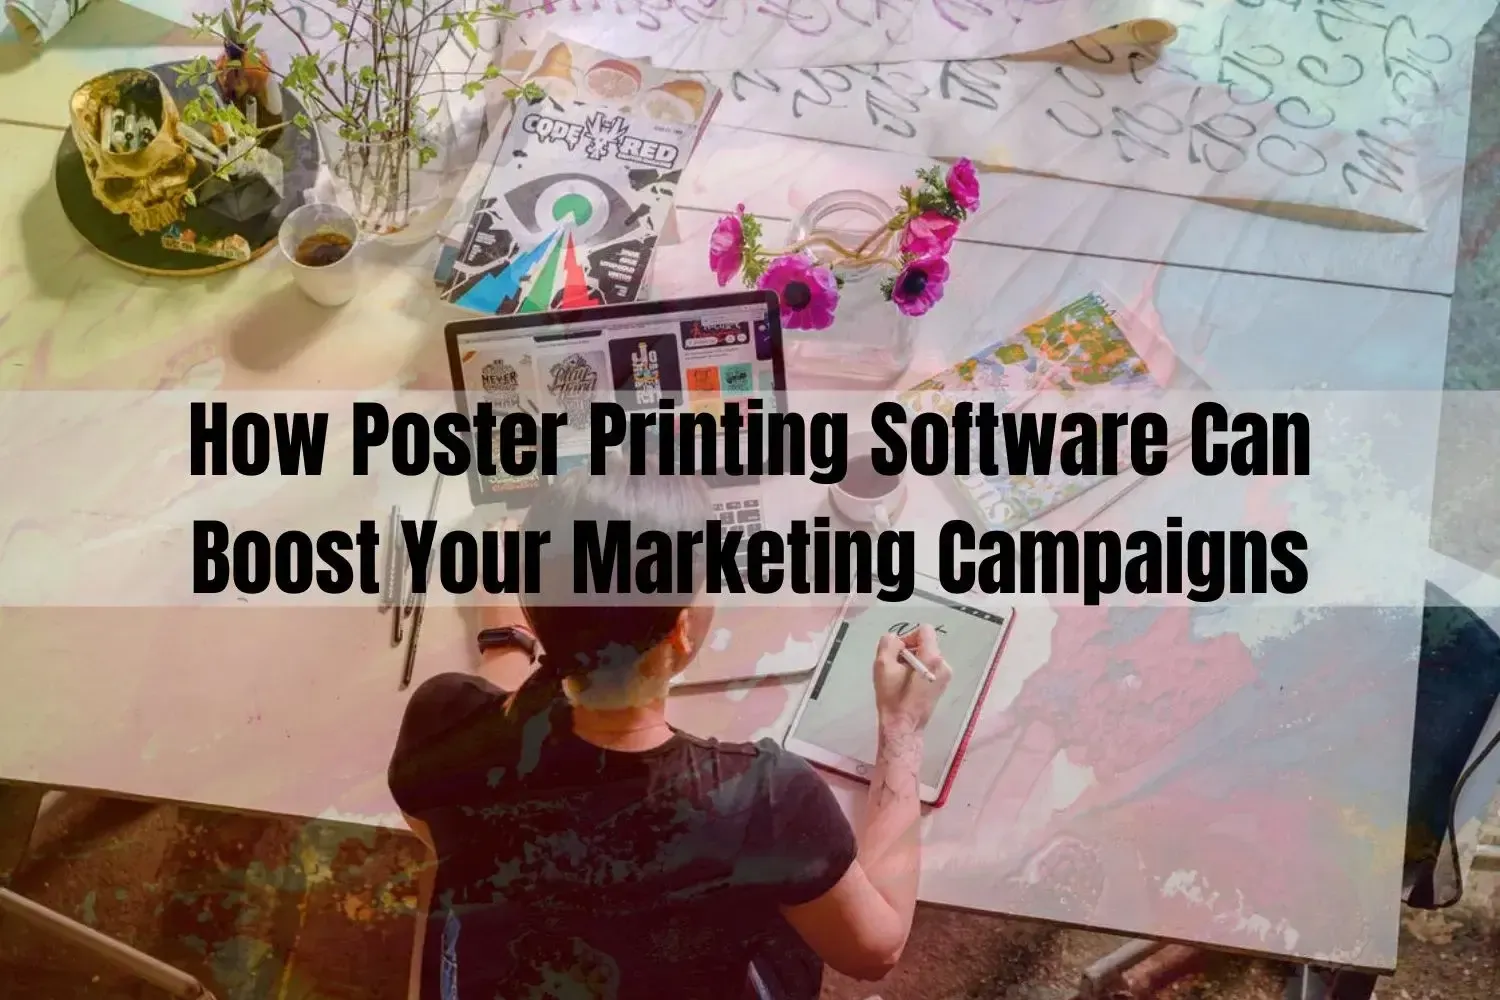 Boost your marketing campaigns with poster printing software